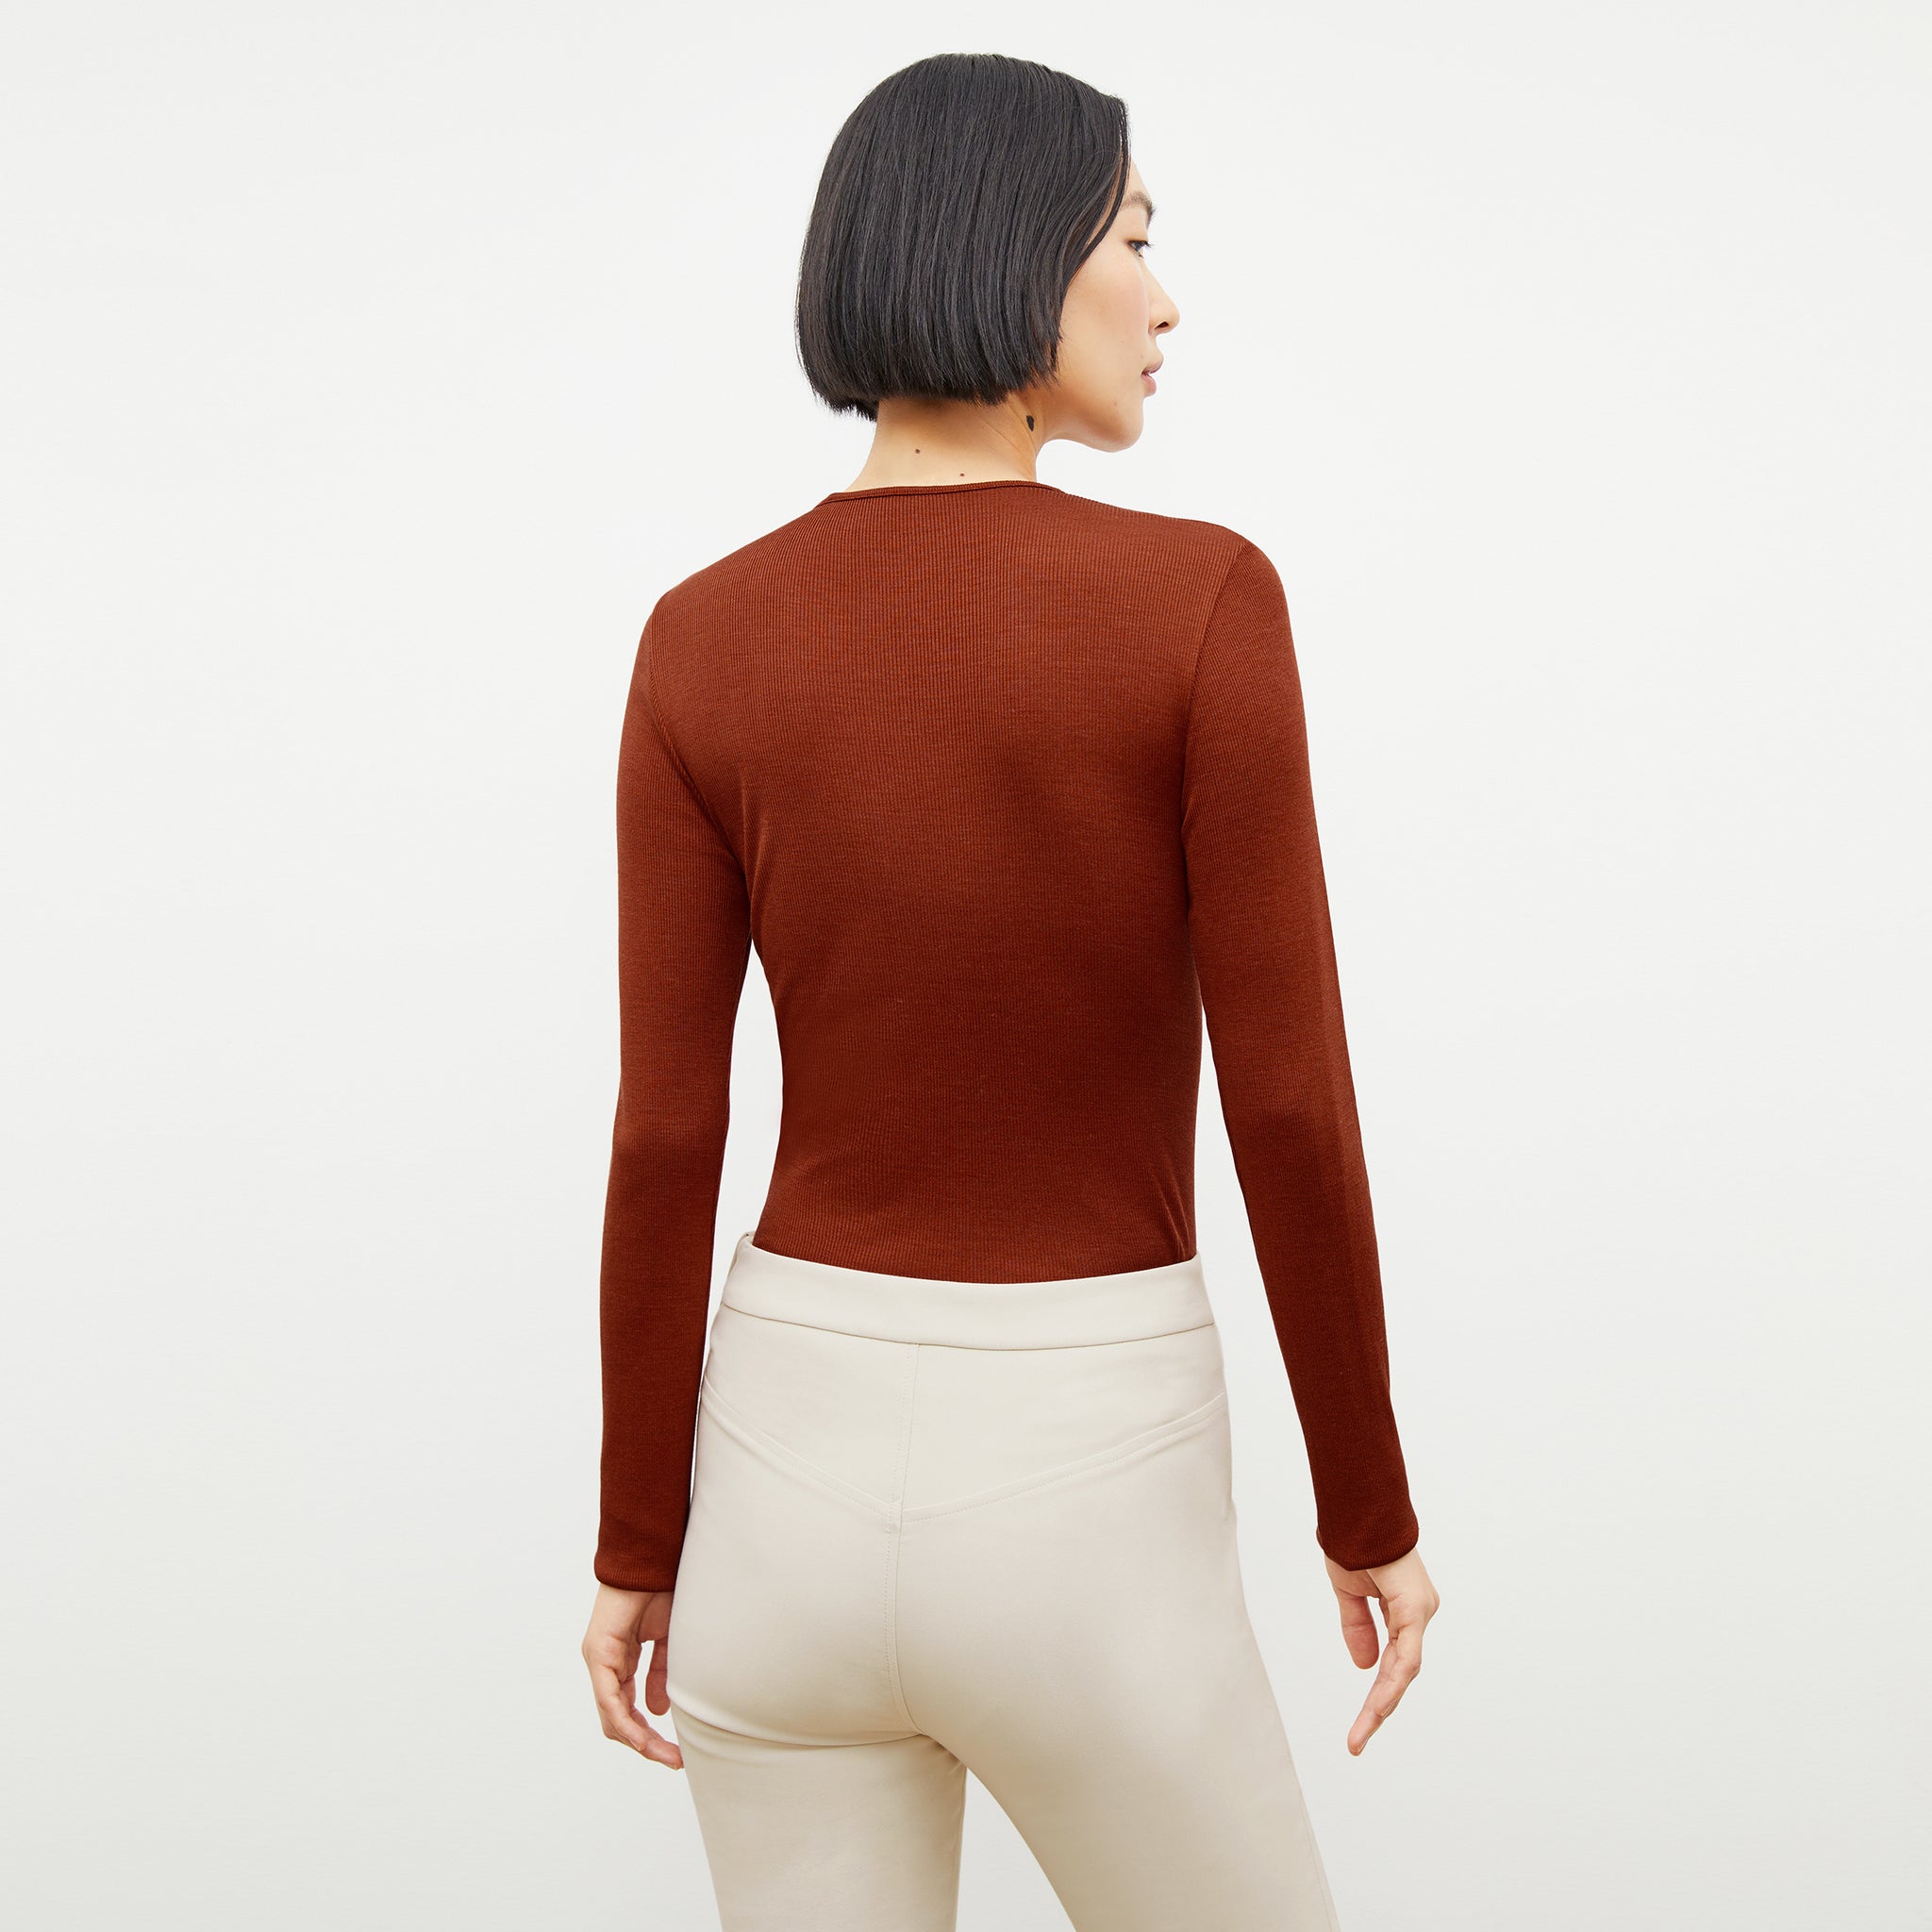 Back image of a woman wearing the malley top in Mars 